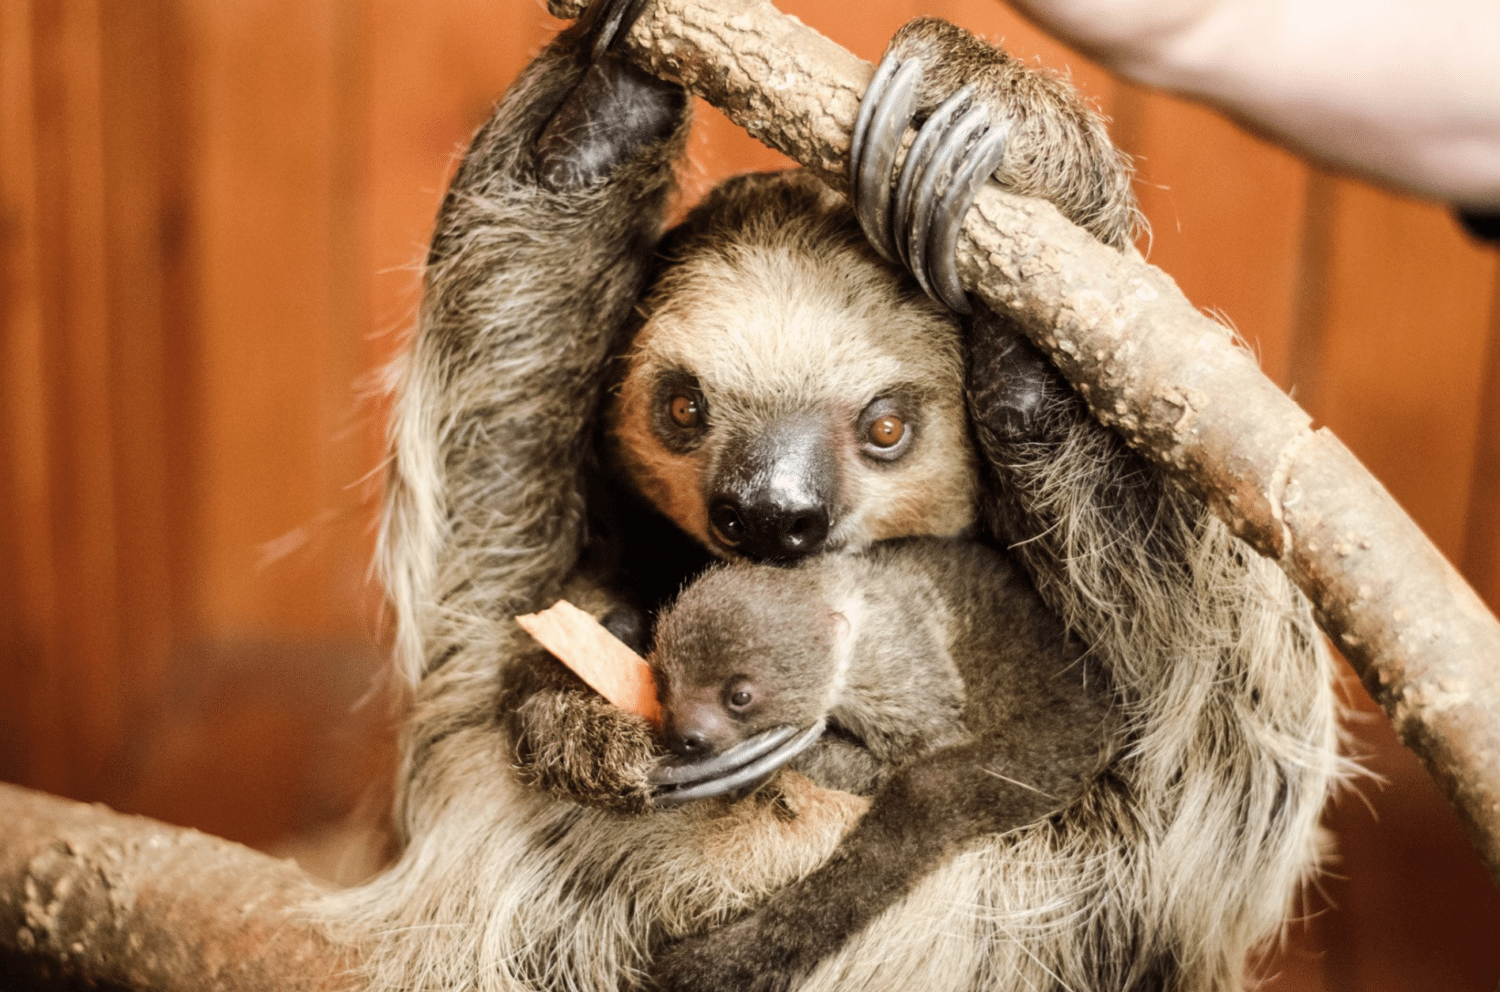 Surprise Baby Sloth Born At Texas Zoo - Simplemost1500 x 992